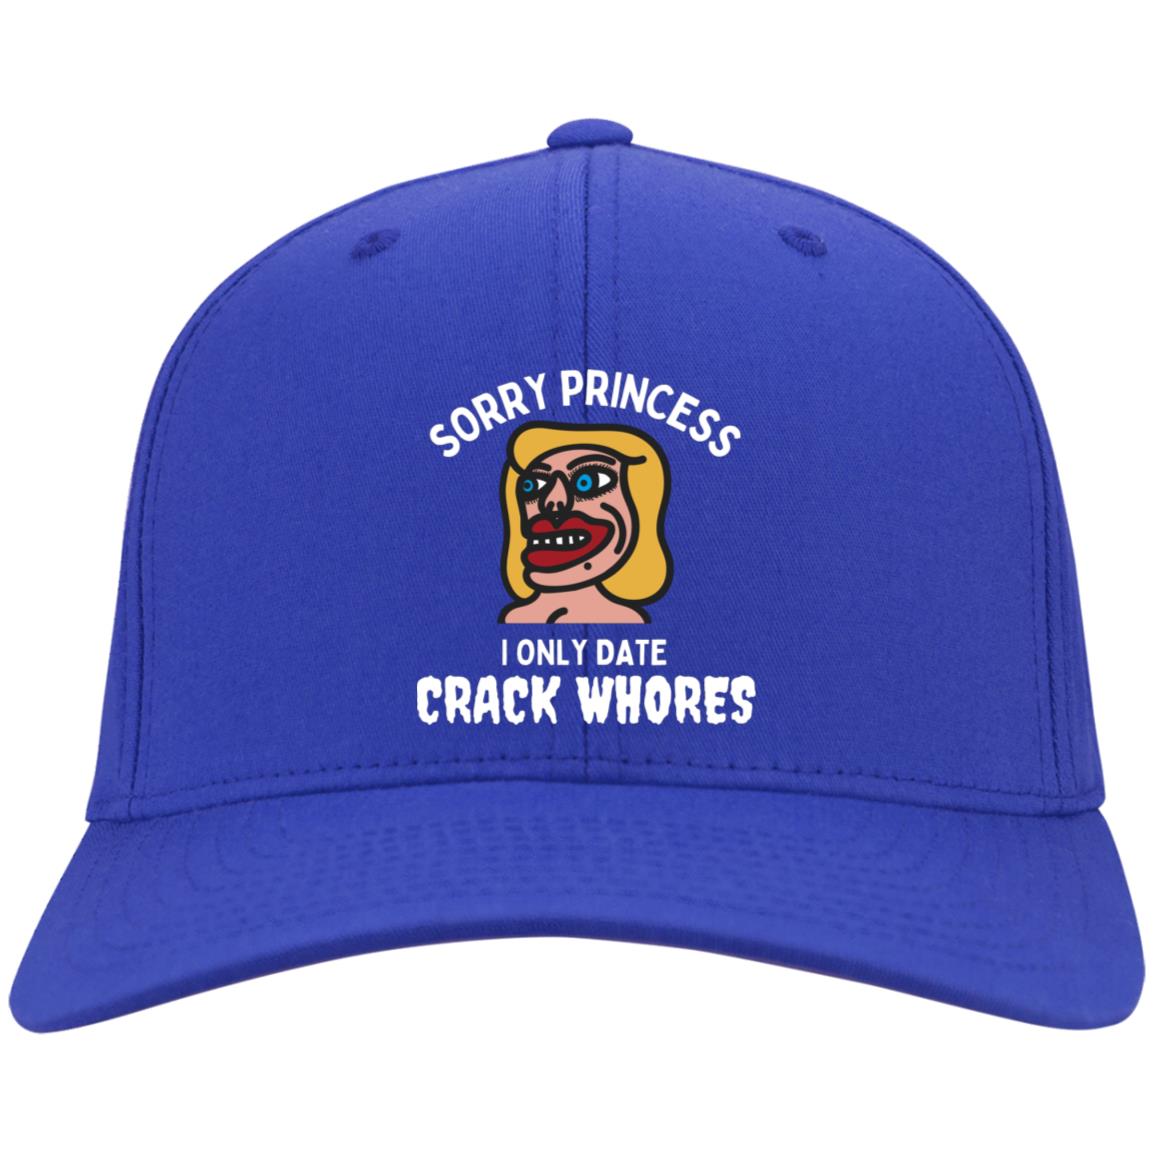 Sorry Princess I Only Date Crack Adult Humor Twill Cap